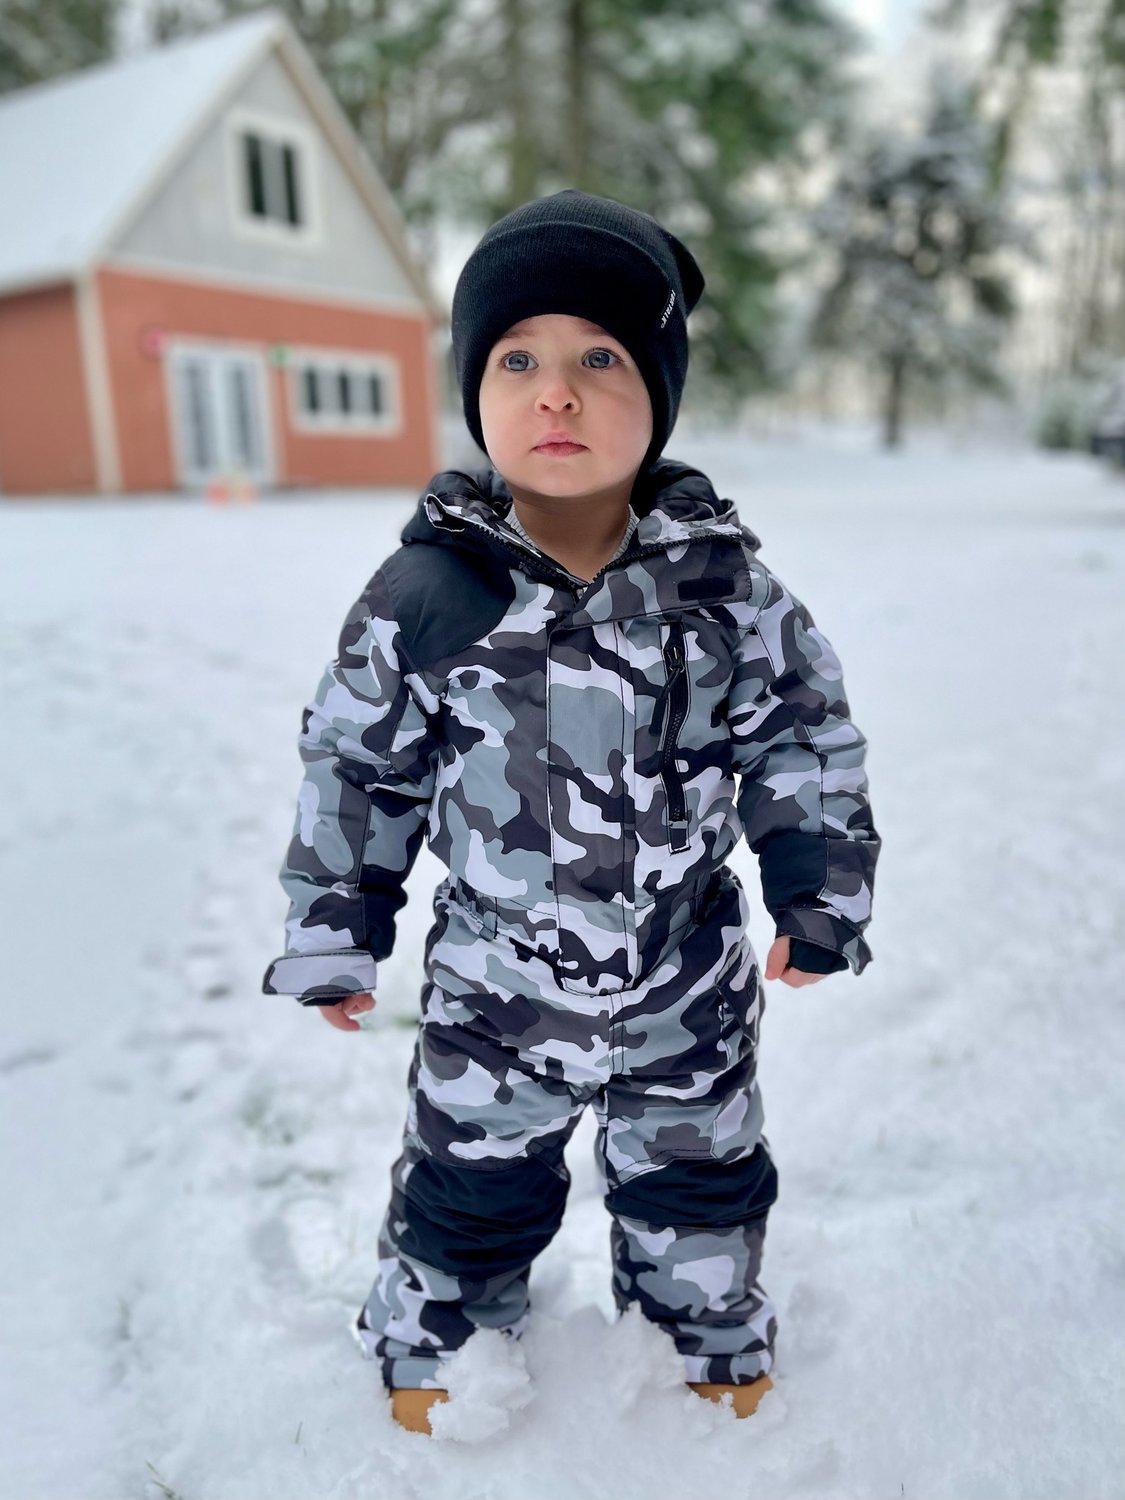 "Maverick Lepping (1.5 years old) in the snow!" — Tami Lepping